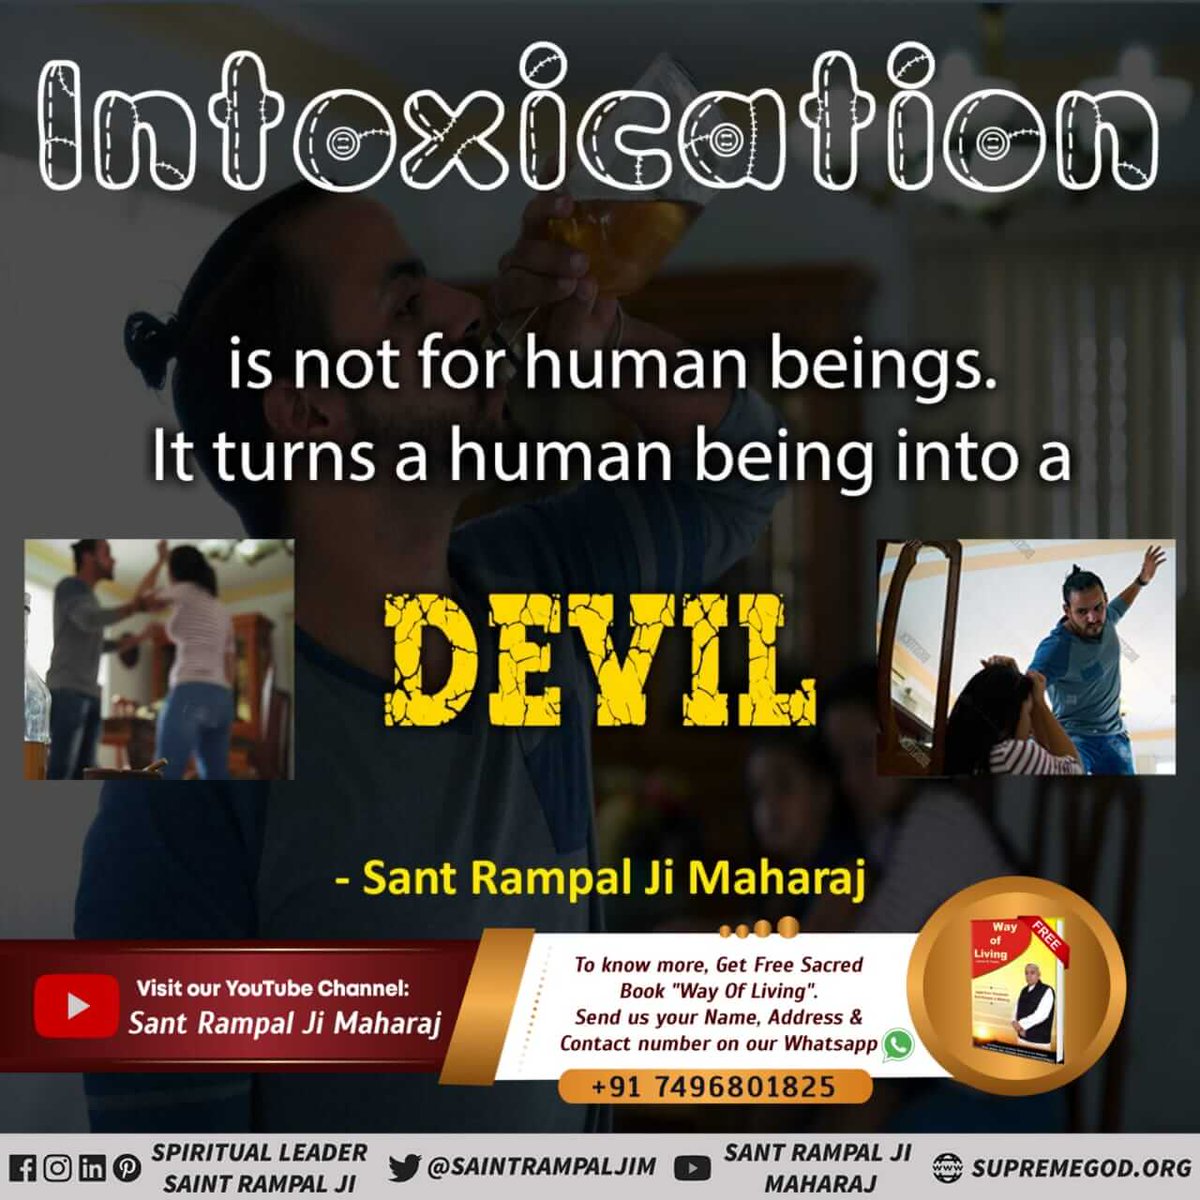 #GodMorningMonday
Intoxication
is not for human beings.
 It turns a human being into a
DEVIL

- Sant Rampal Ji Maharaj‌